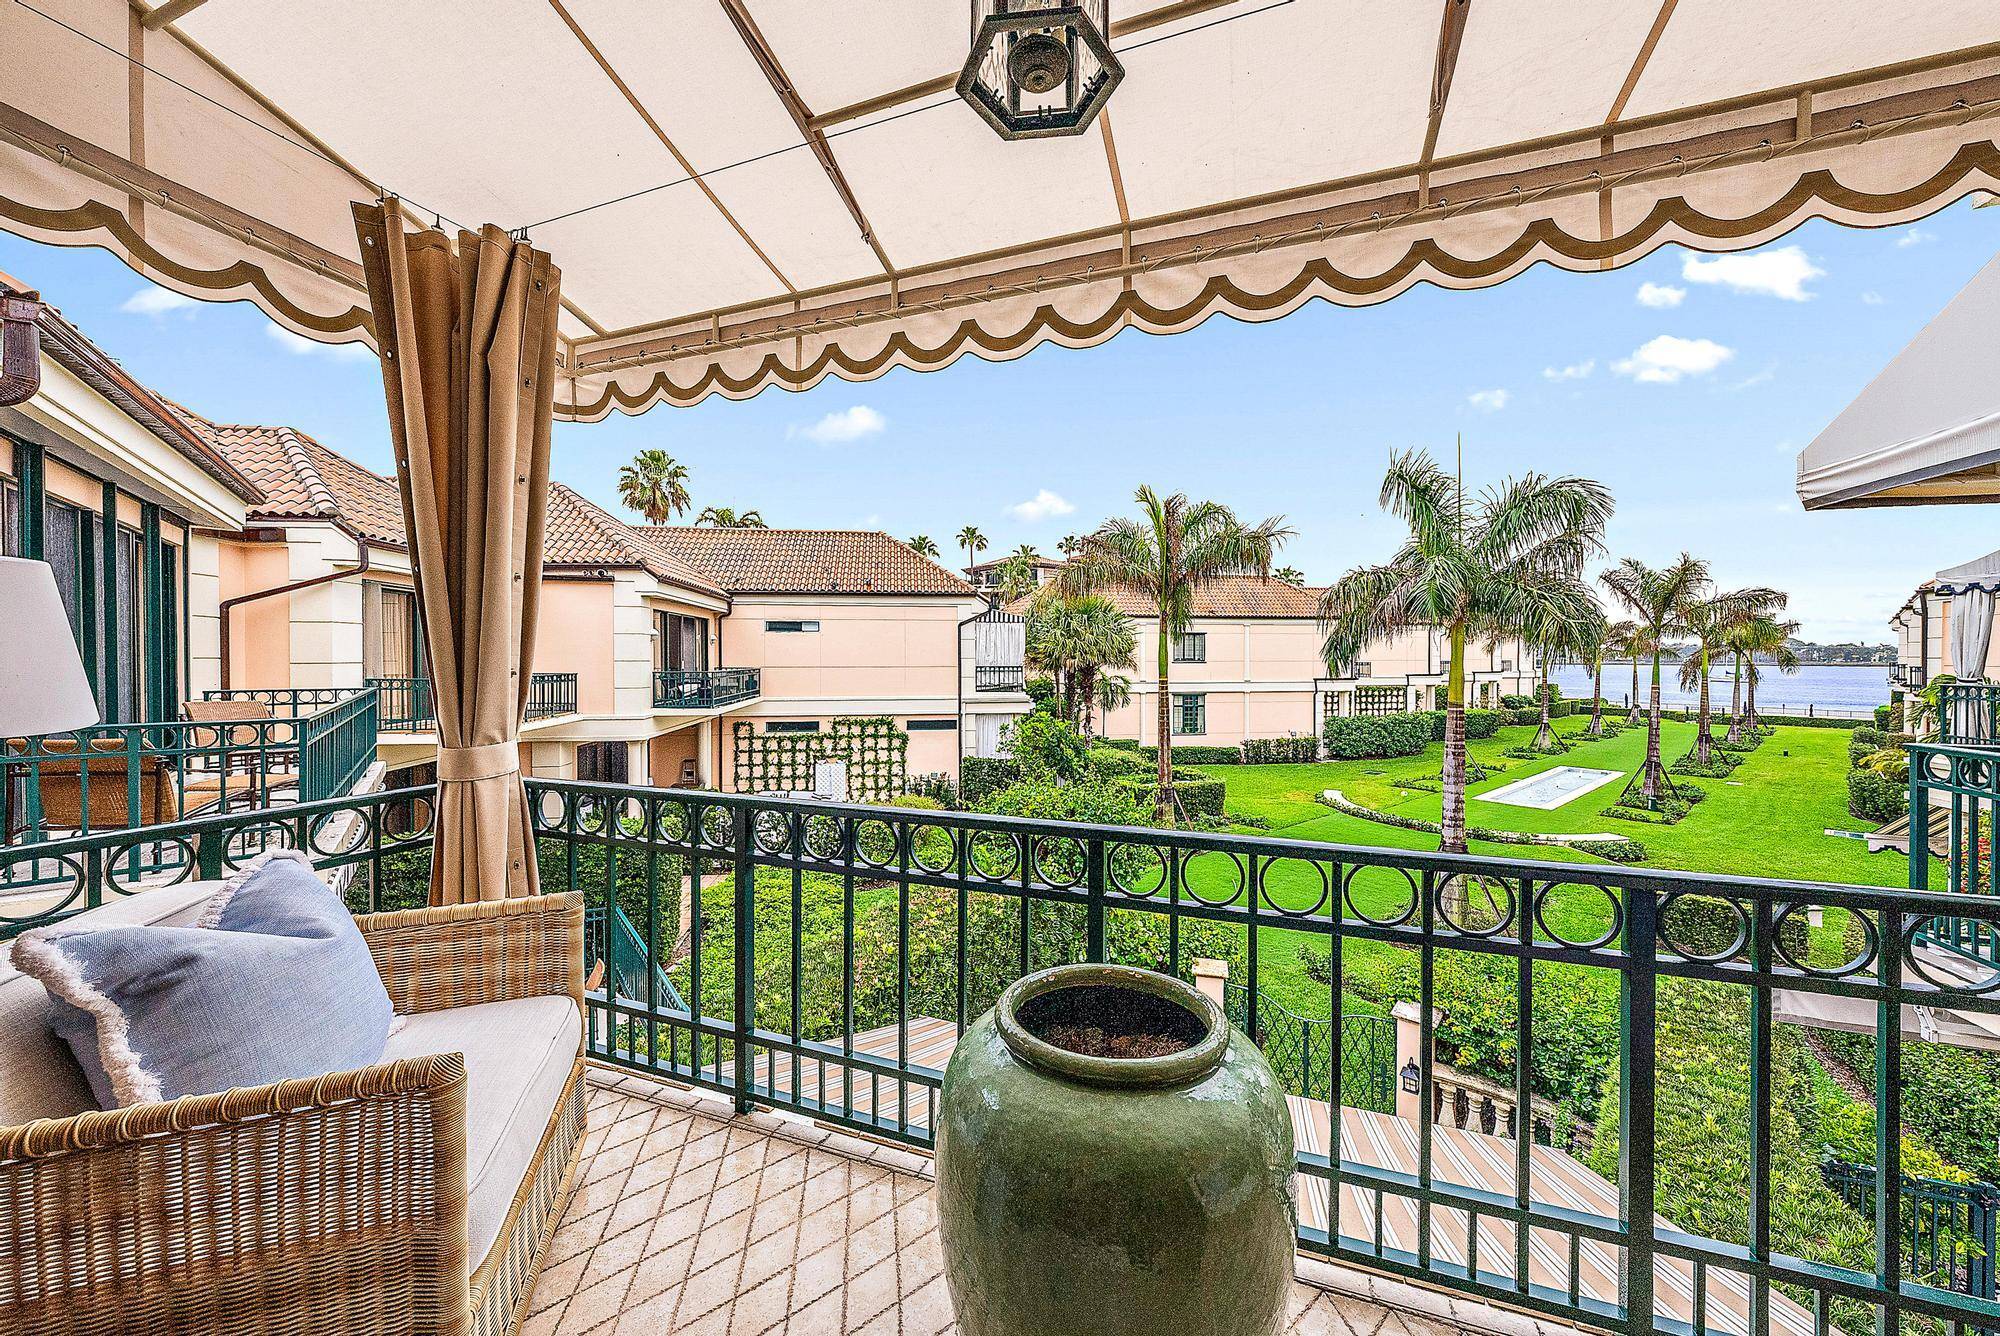 Sublimely located on the Intracoastal Waterway, this beautiful 3 BR, 4.